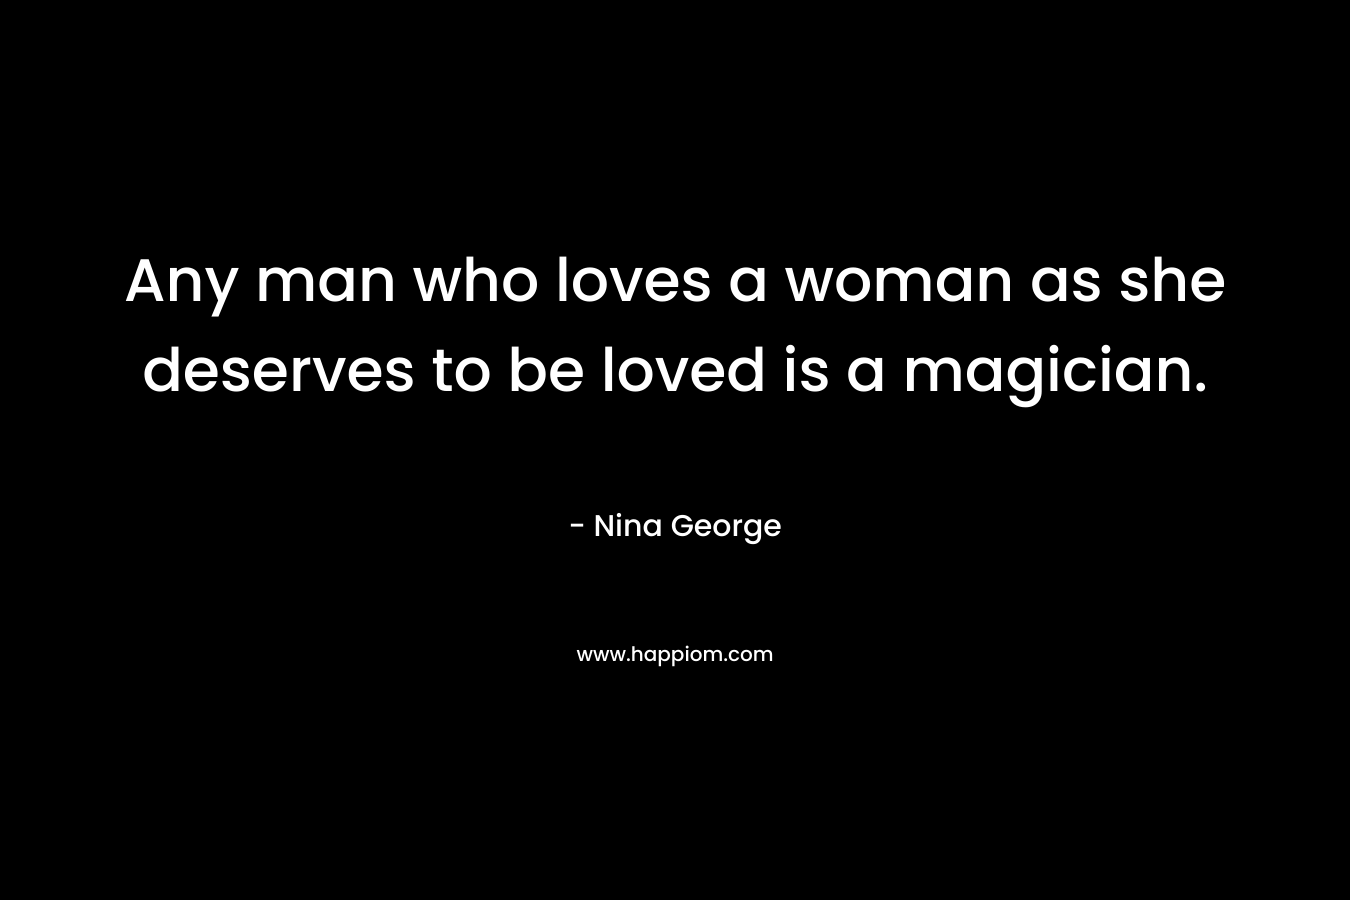 Any man who loves a woman as she deserves to be loved is a magician.